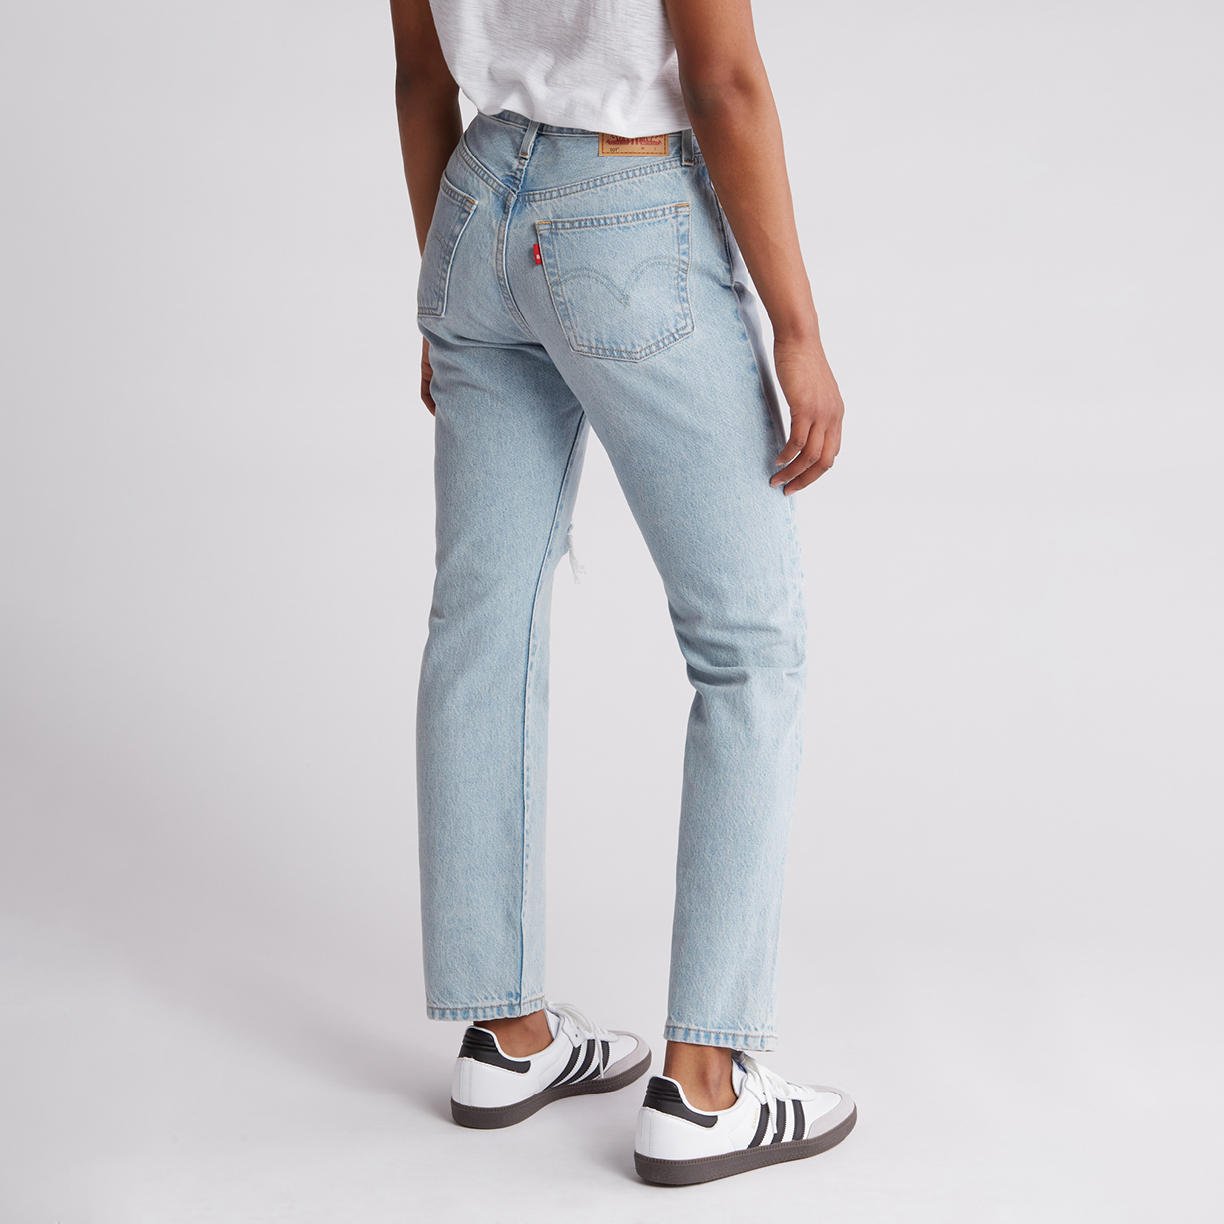 Levi's® from \\$29.97